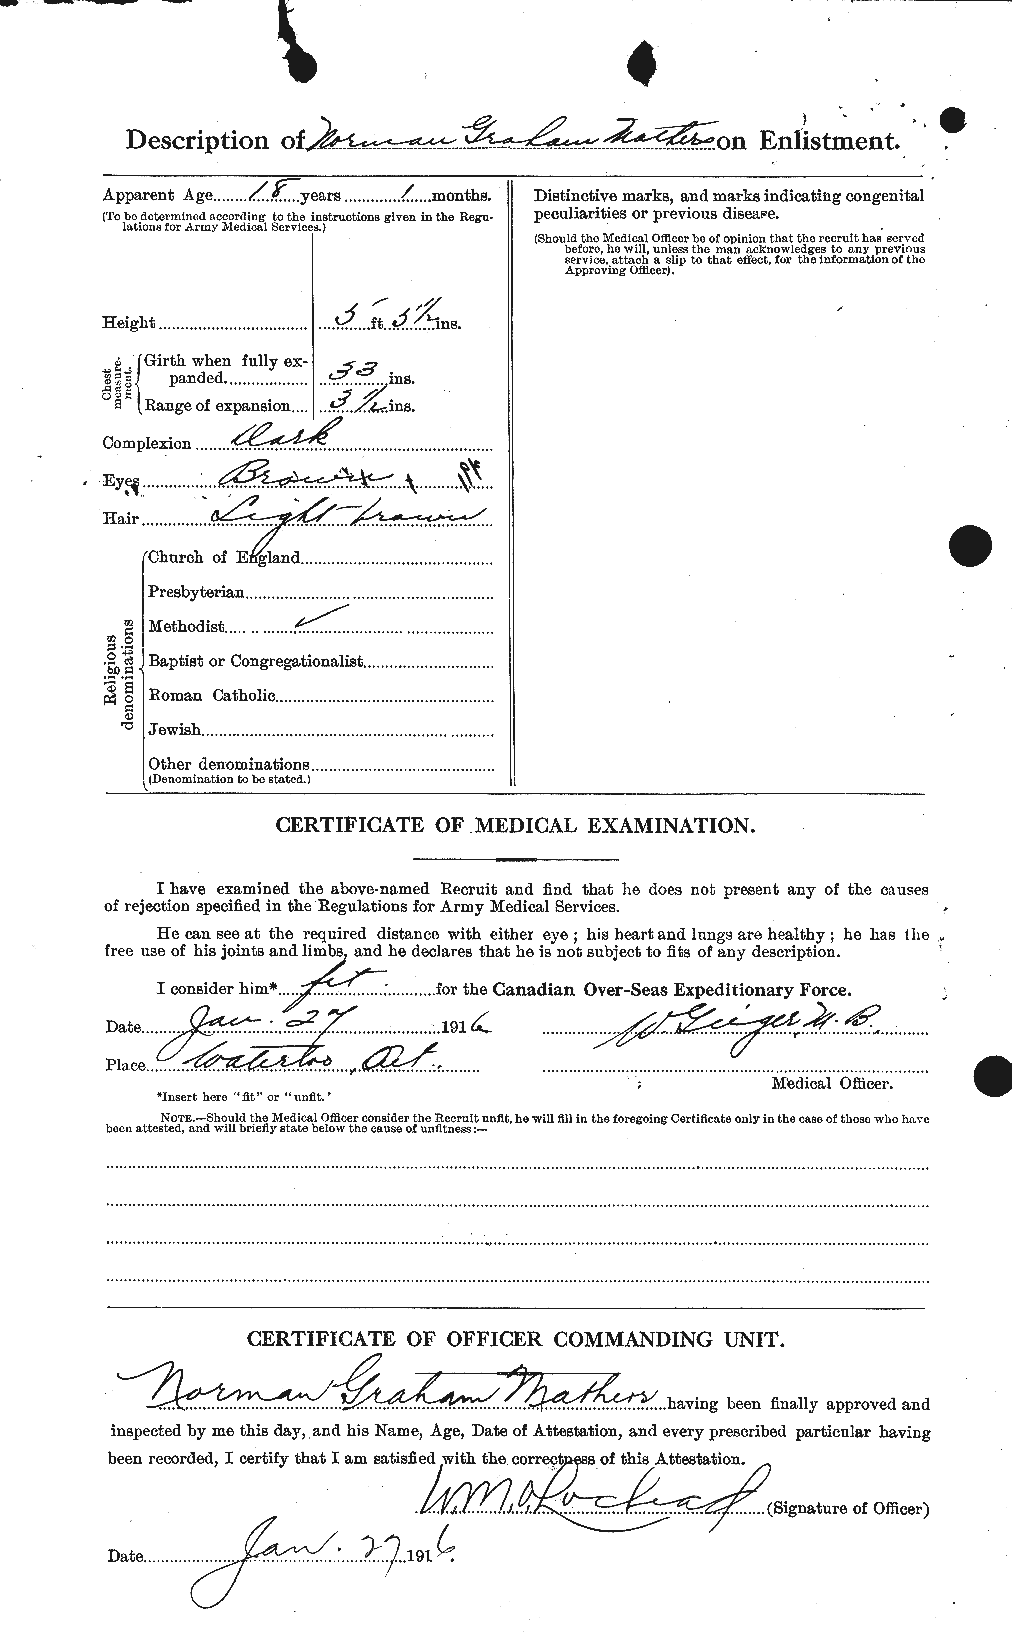 Personnel Records of the First World War - CEF 488722b